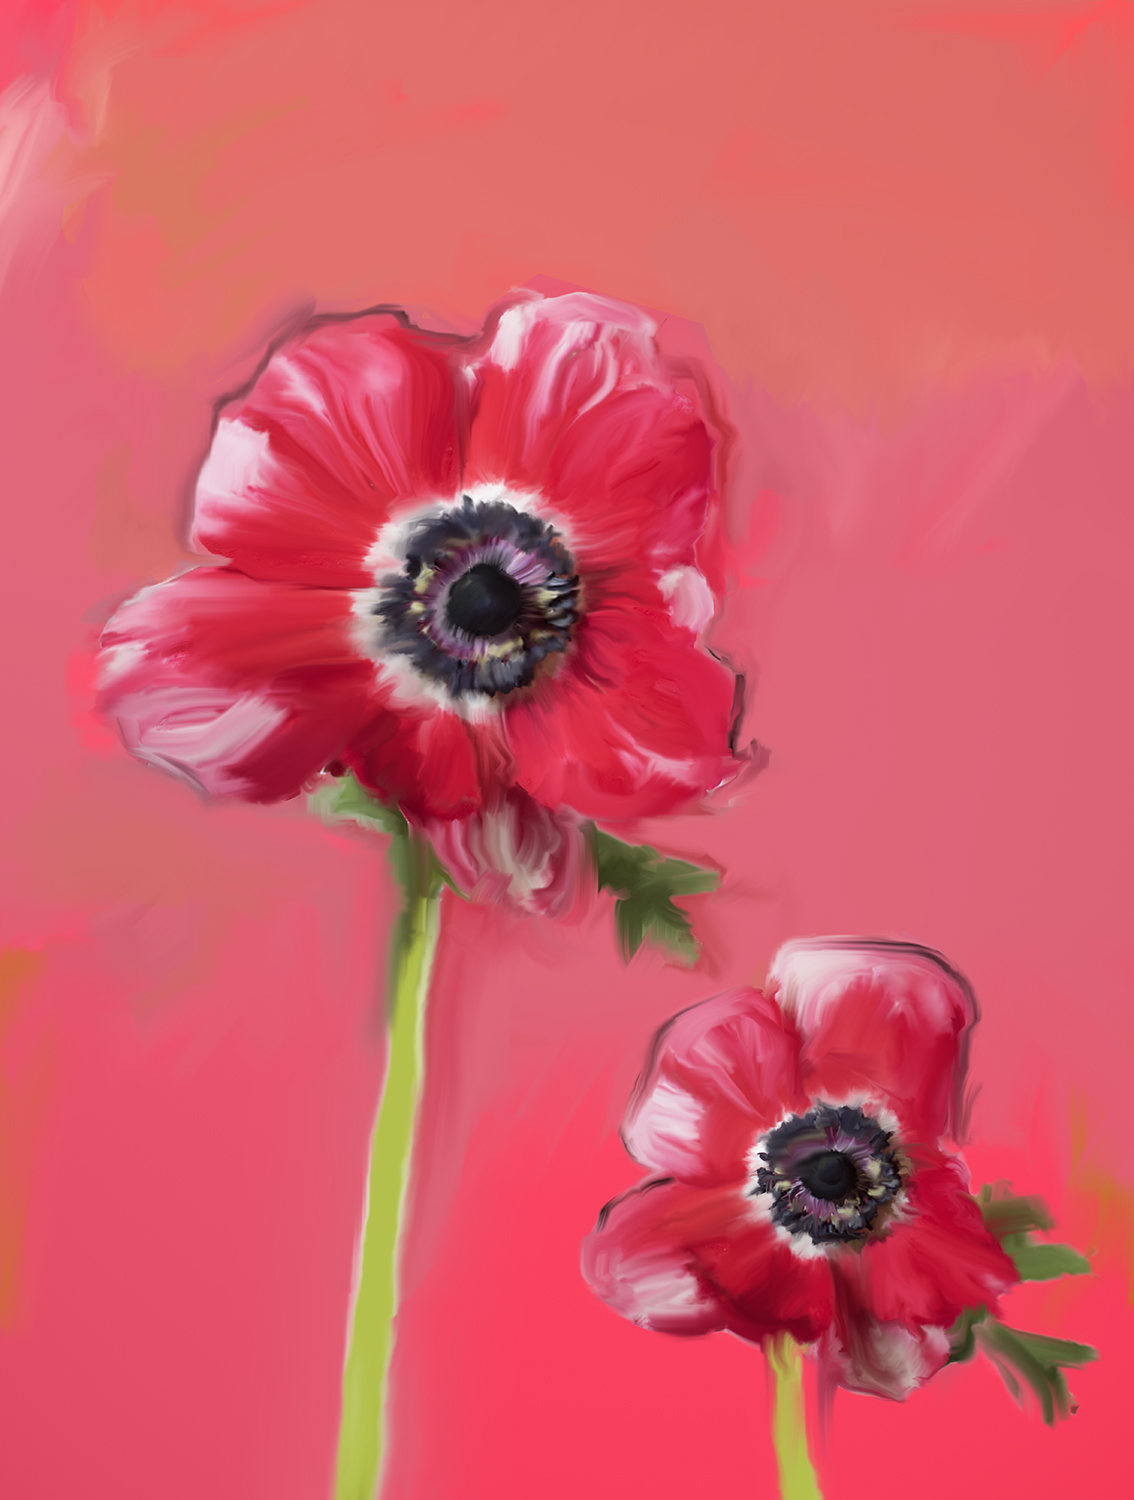 Poppies on red background_2019_glicee Photographic print 50.9 x 60.9cms